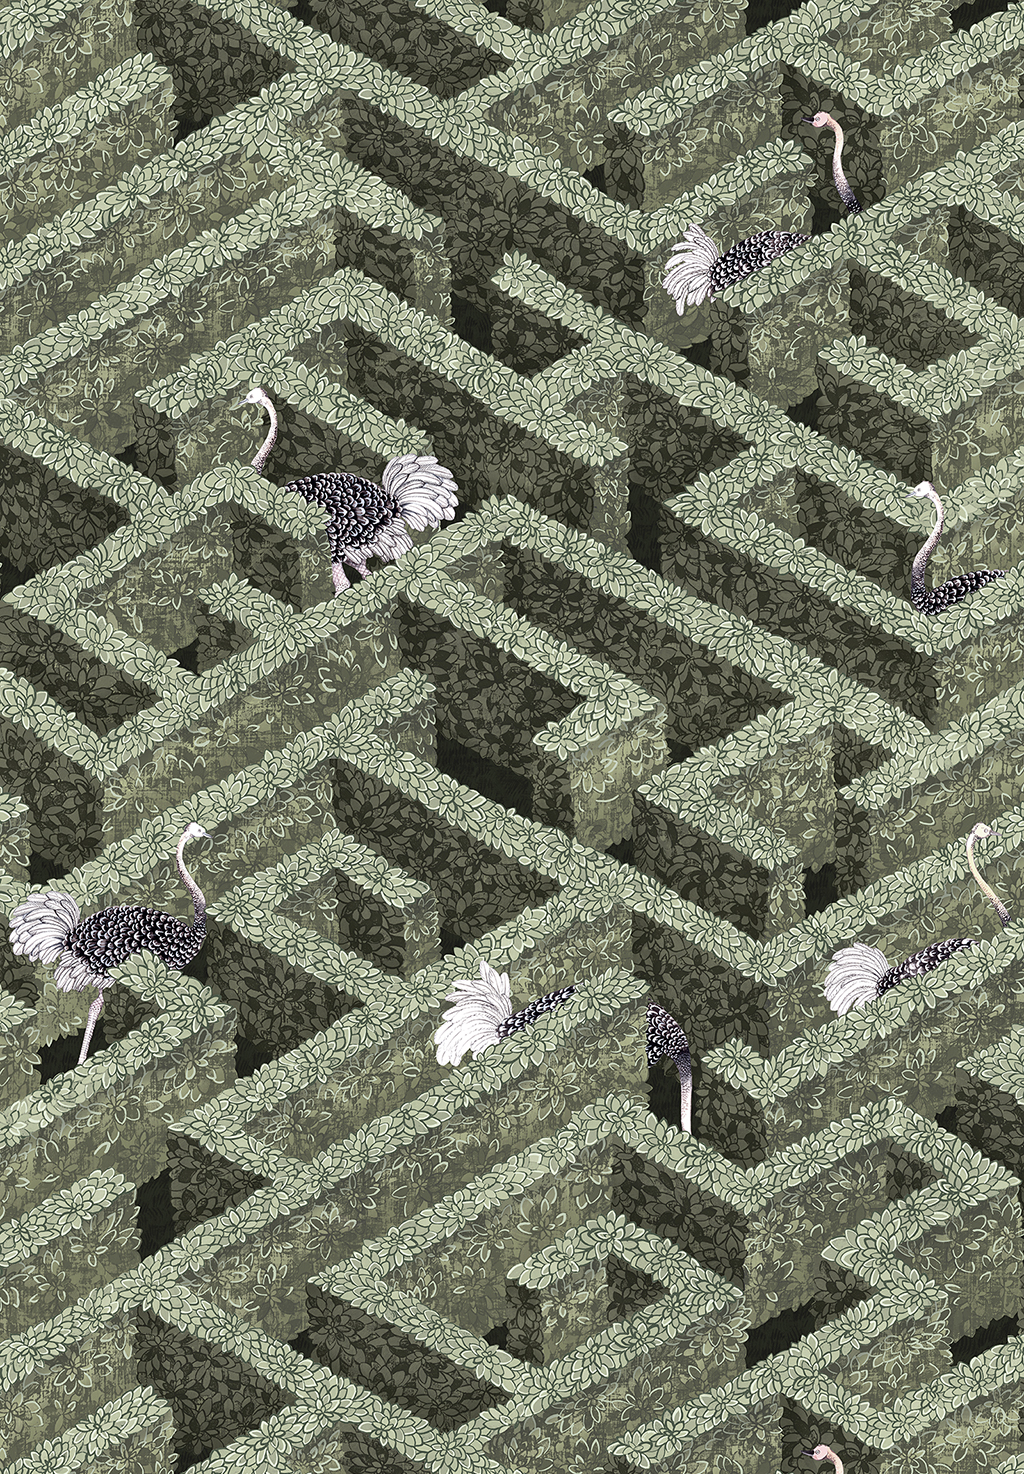 Labyrinth with Ostriches Wallpaper - Eucalyptus